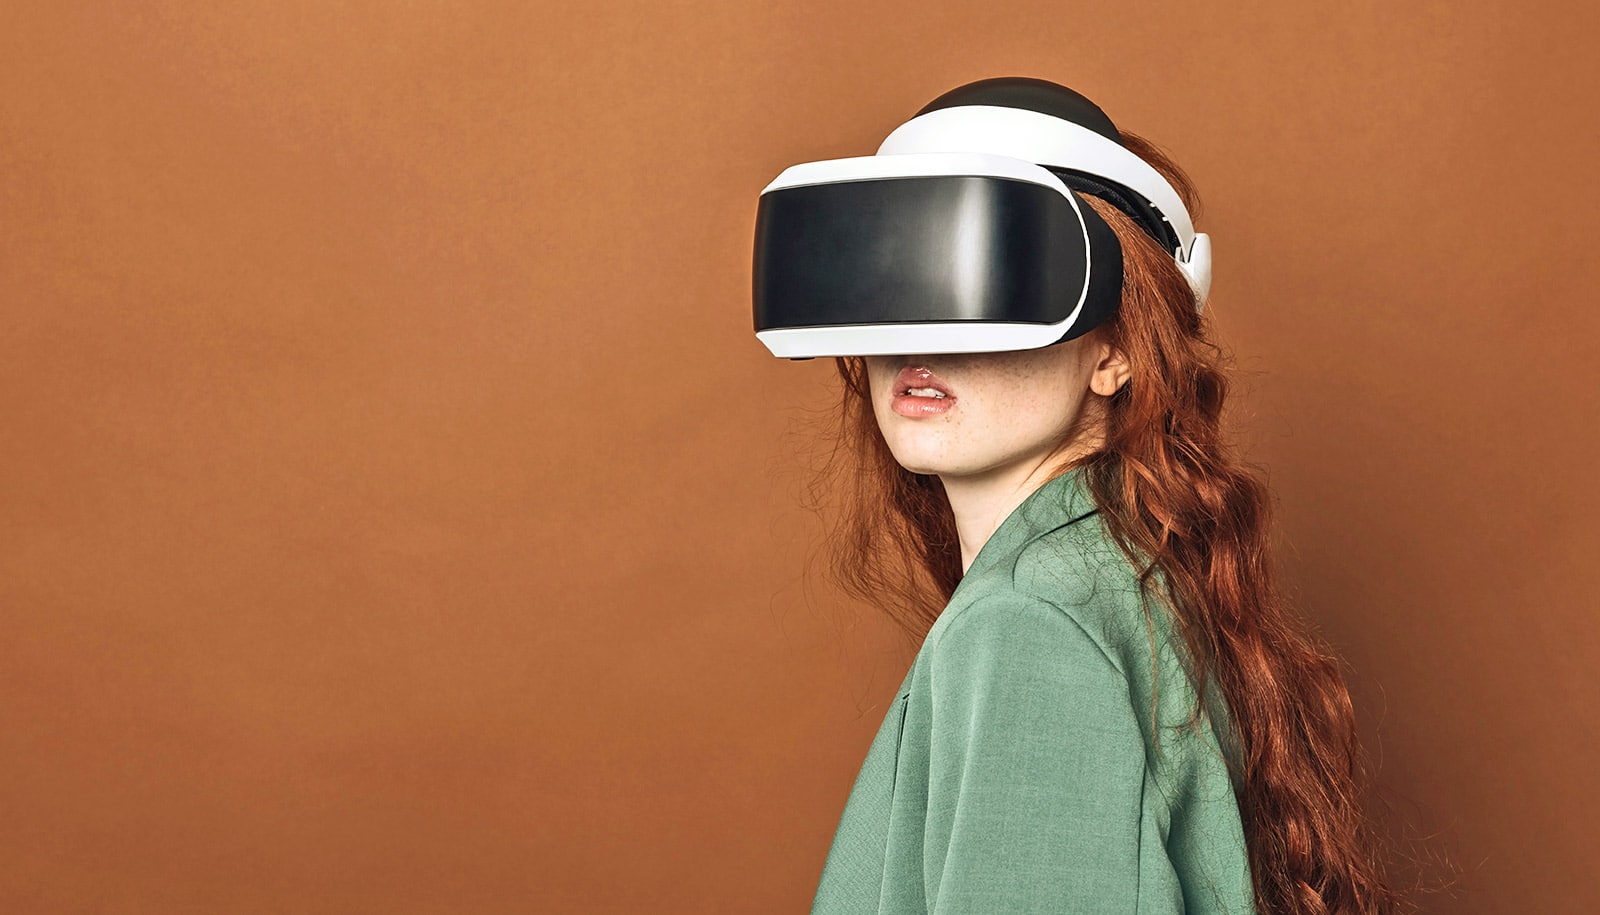 A woman wearing a virtual reality headset looks towards the camera.